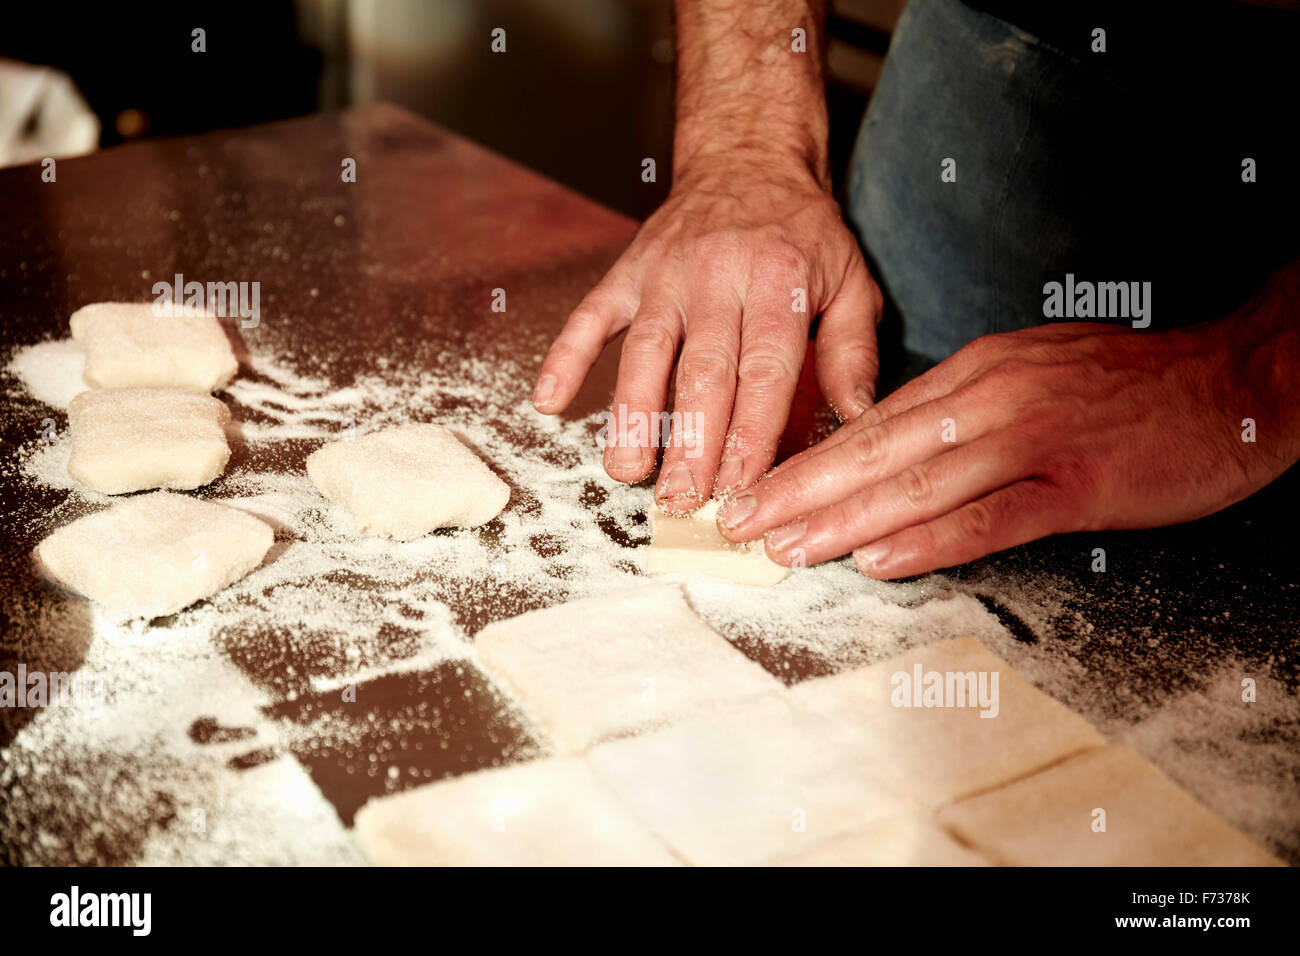 A baker working on a floured surface, dividing the prepared dough into squares. Stock Photo